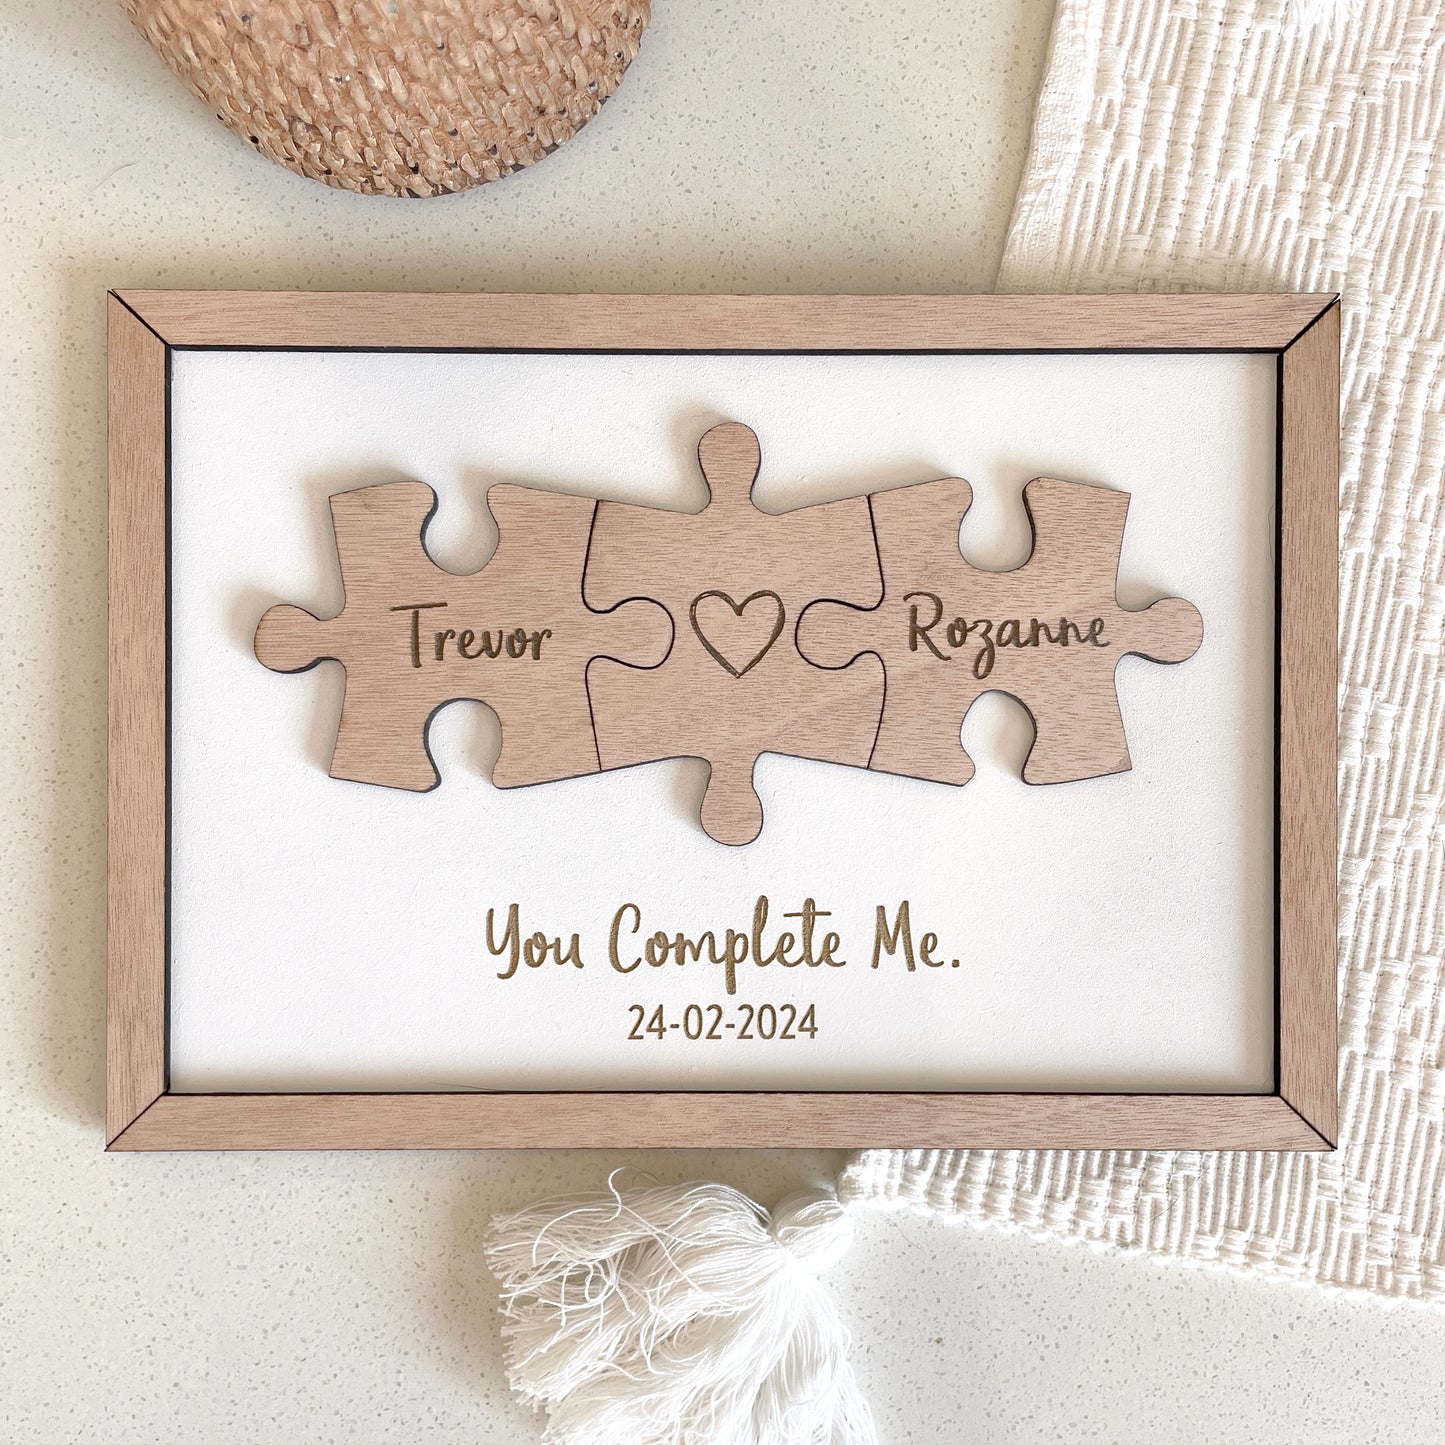 Personalised "You Complete Me" Plaque For Him or Her